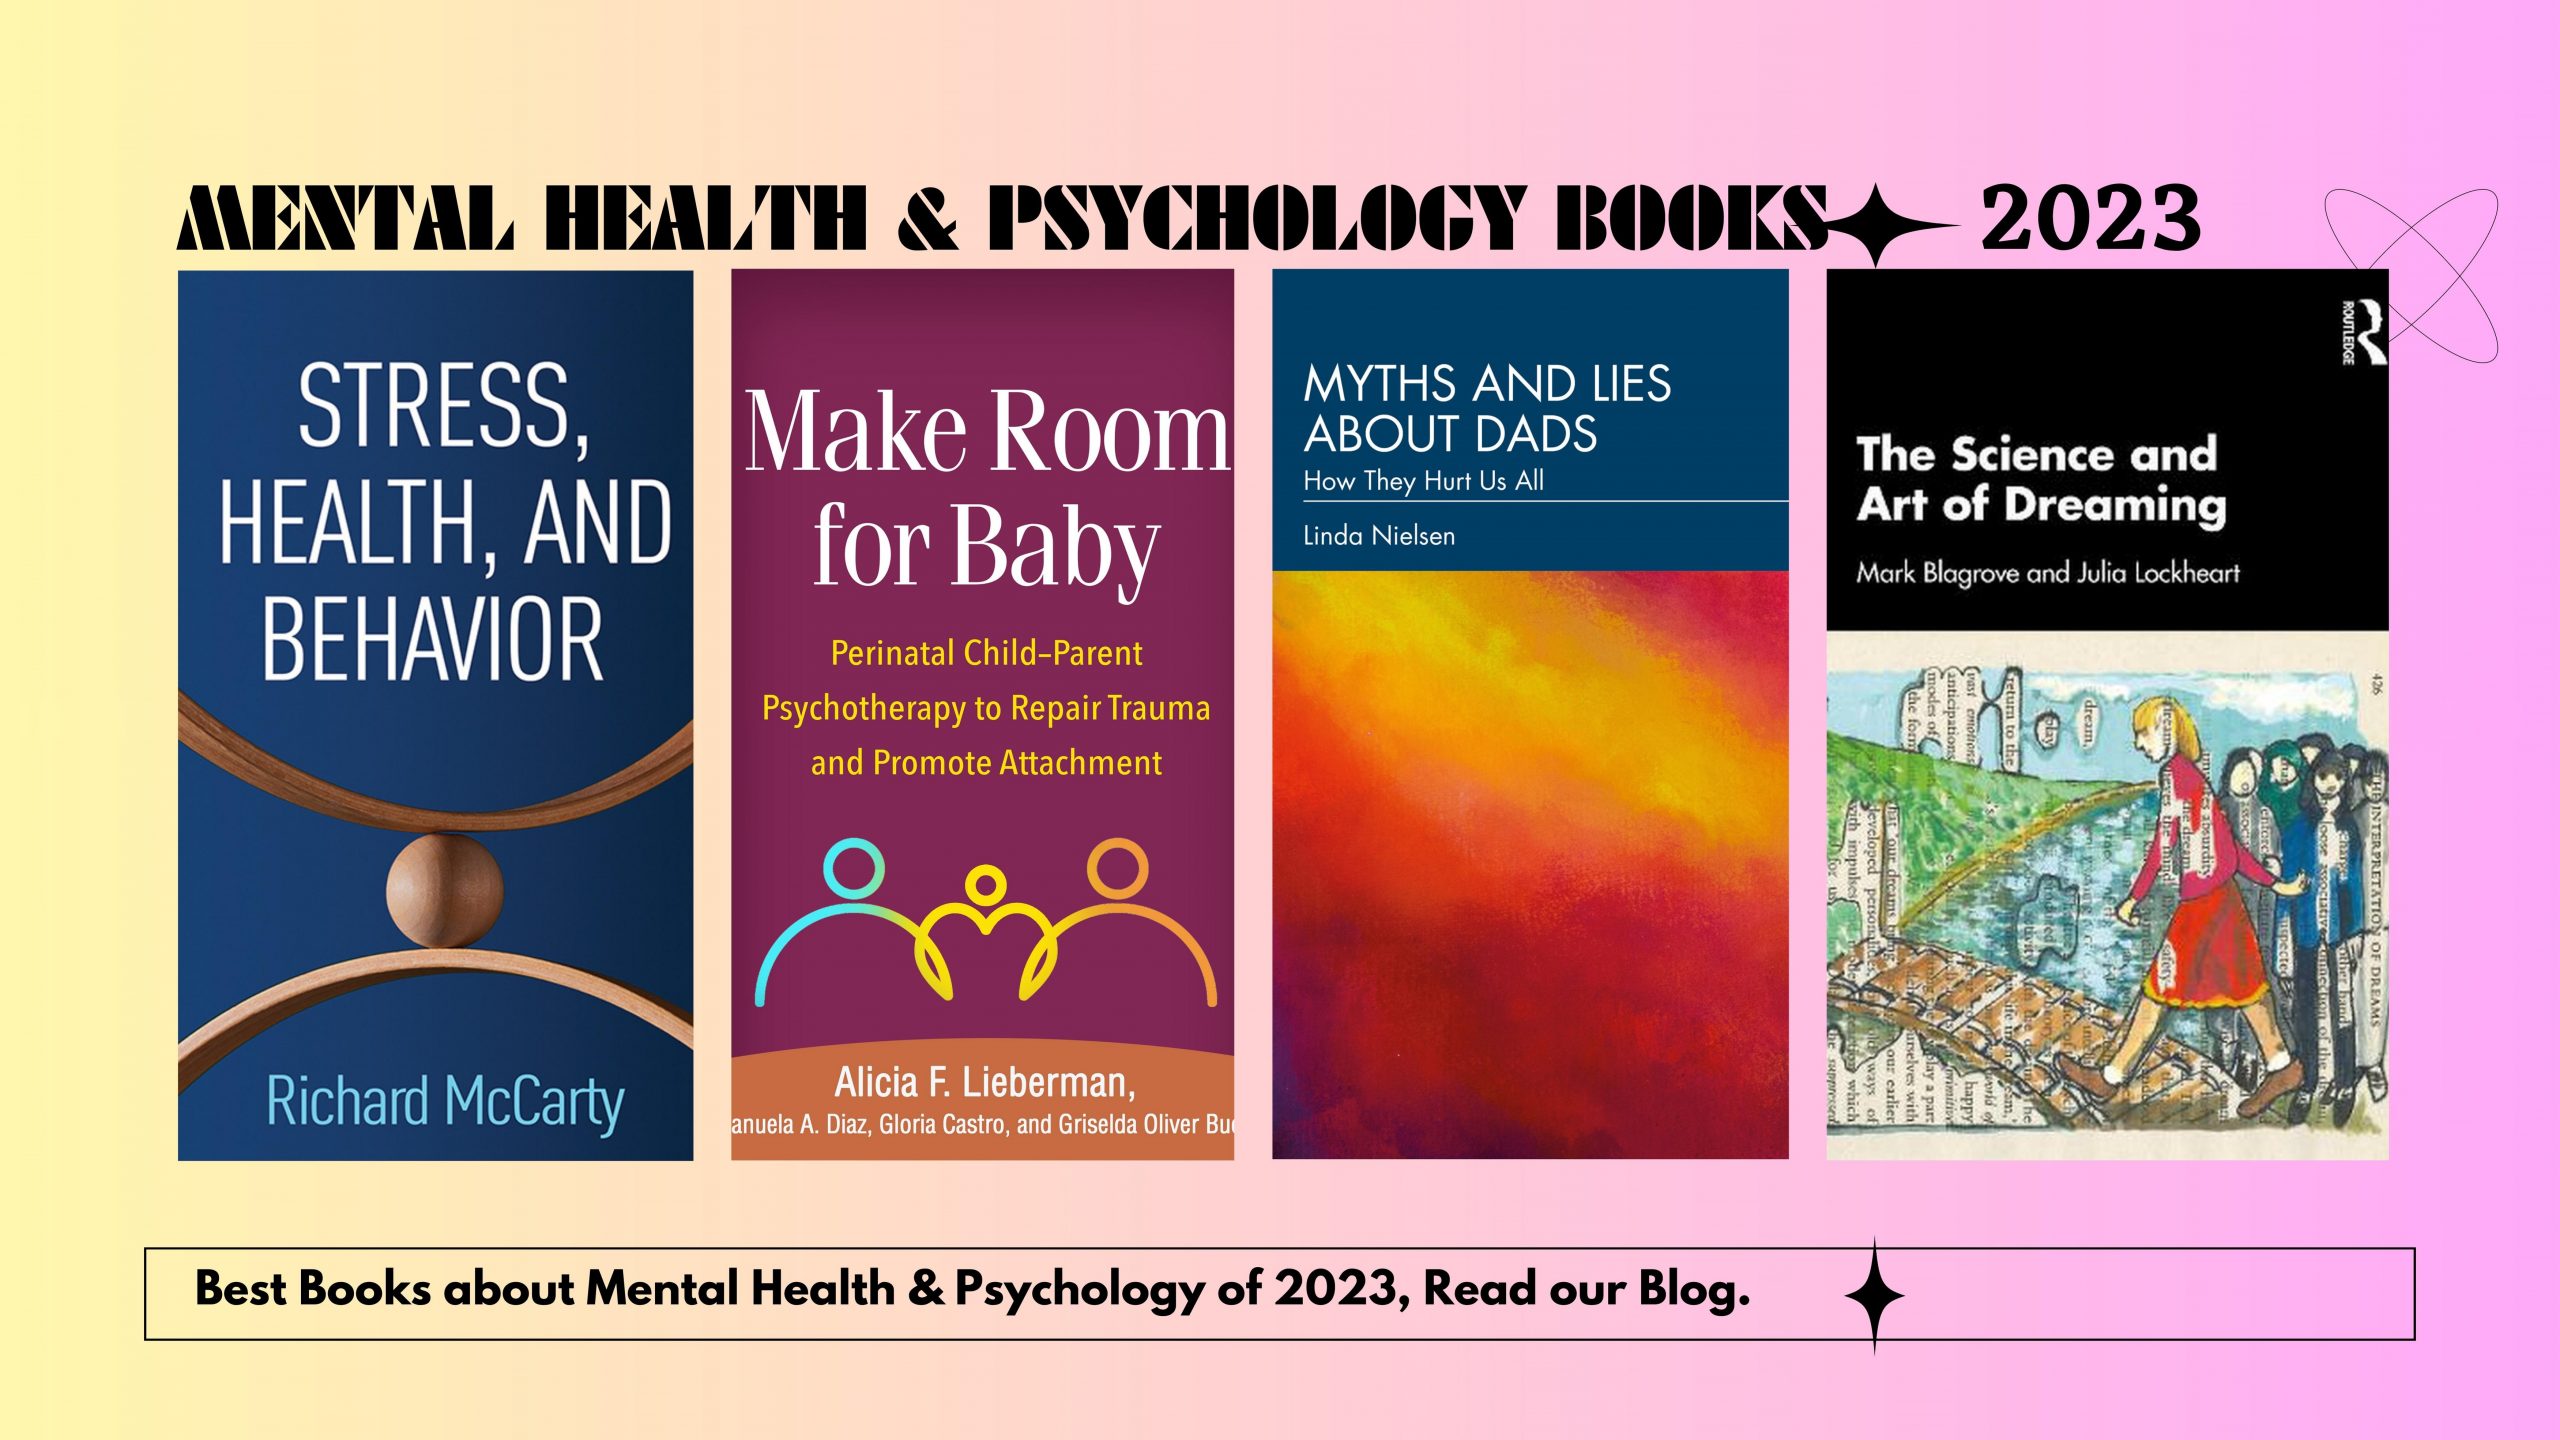 Breaking Barriers: Revolutionizing “Mental     Health and Psychology” Books of 2023